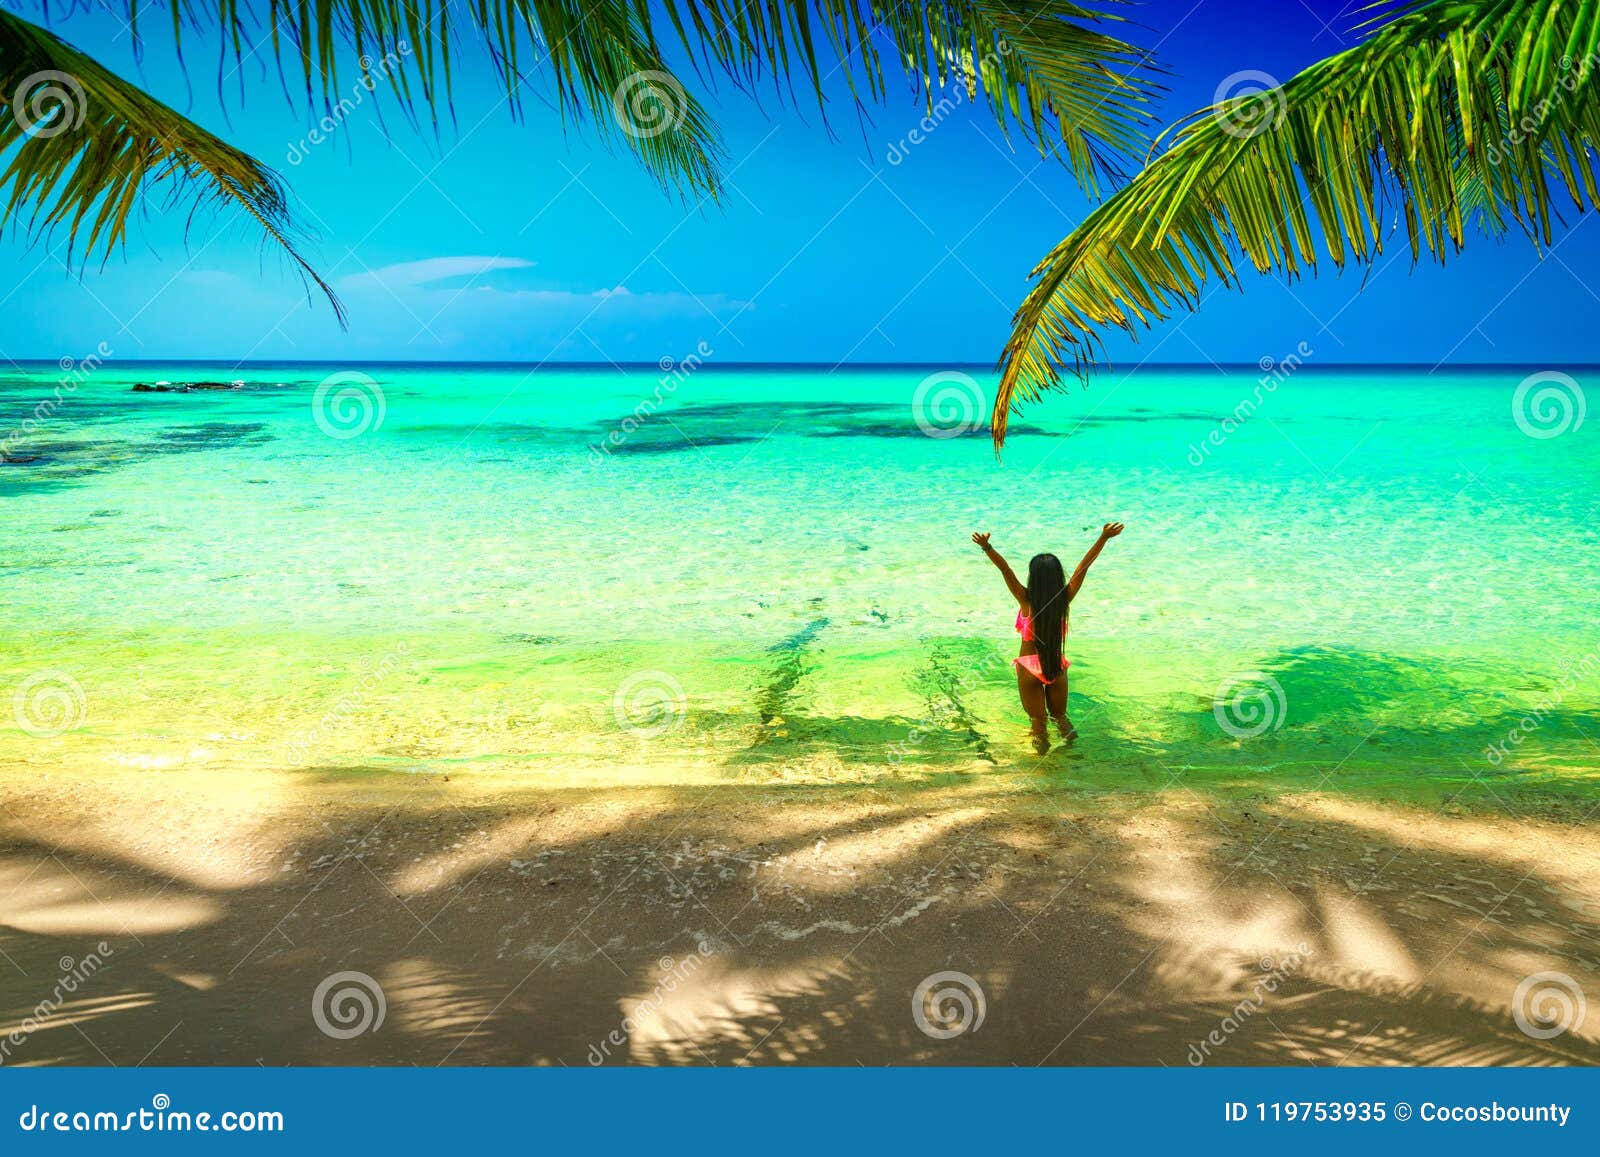 Young Beautiful Asian Girl In Bikini Enjoy Summer Holidays On Tropical Paradise Beach Summer Vacation And Lifestyle Concept Stock Image Image Of Beach Bridge